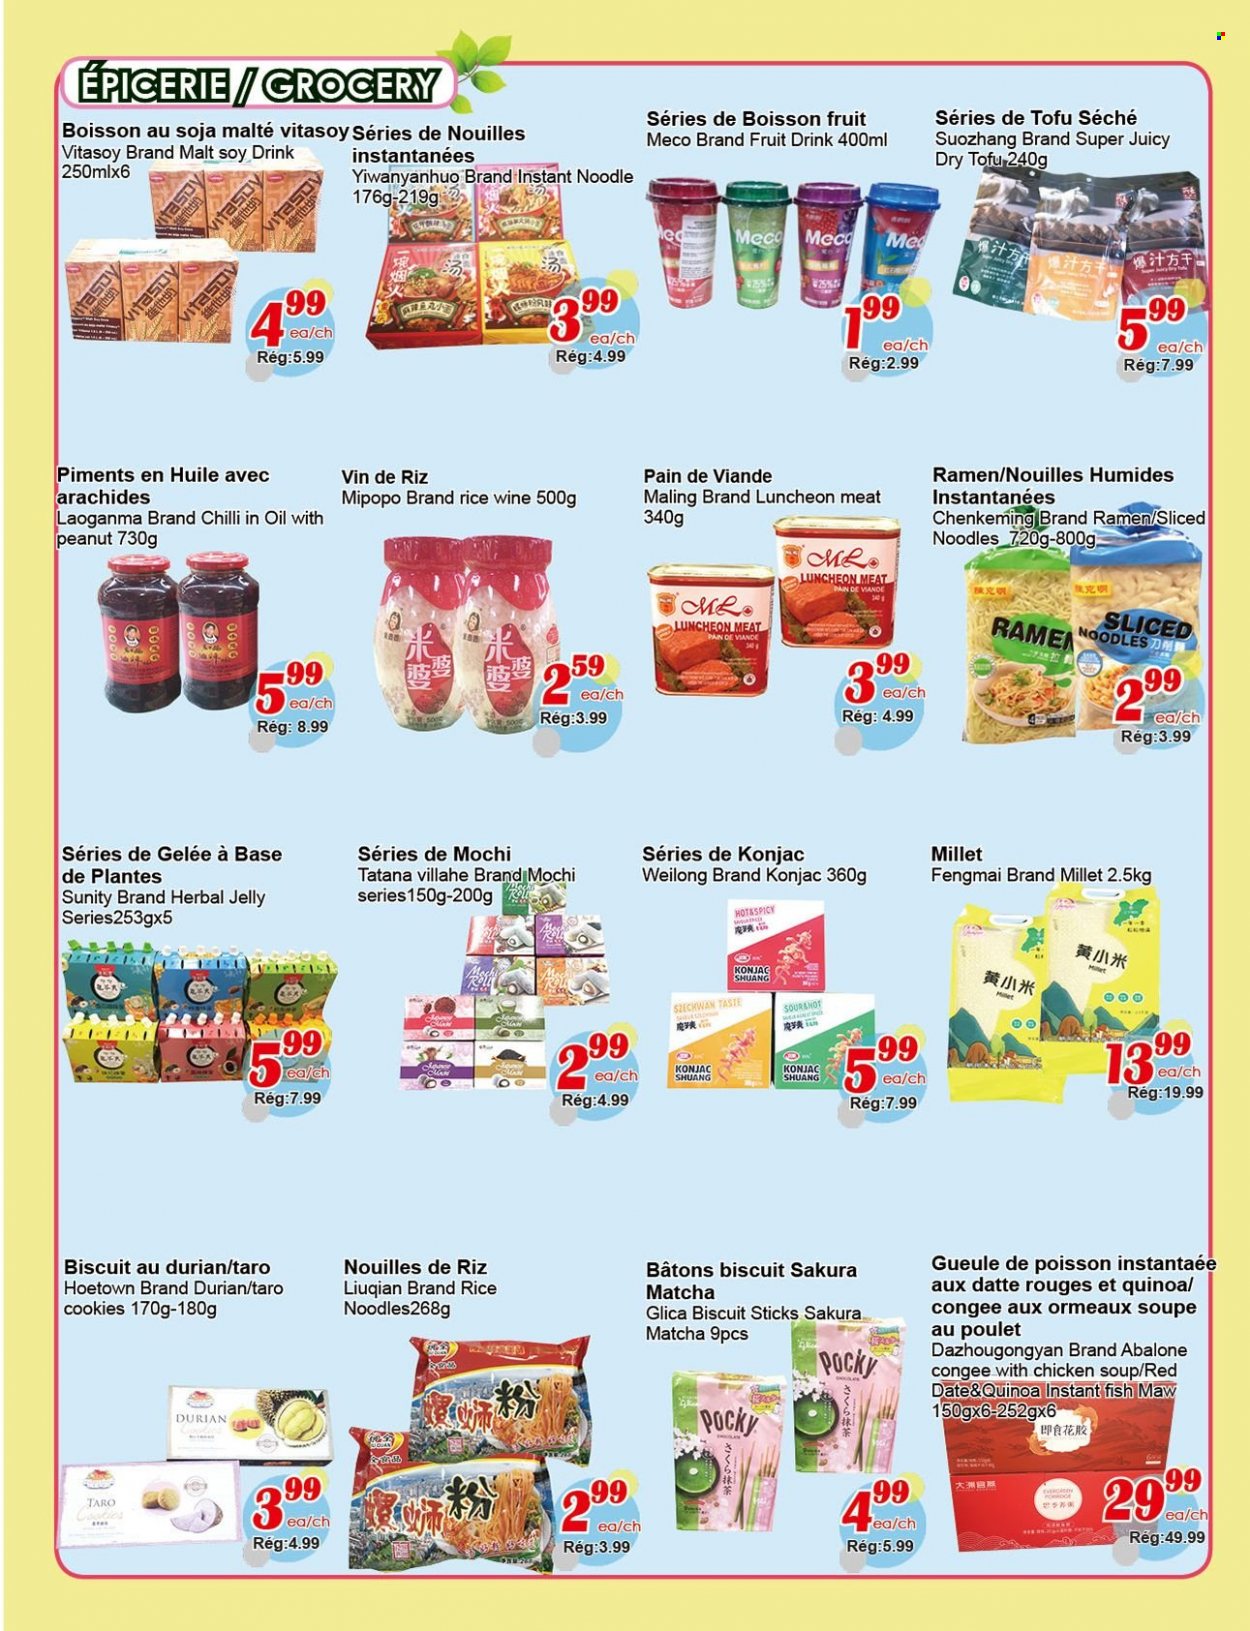 thumbnail - Marché C&T Flyer - June 30, 2022 - July 06, 2022 - Sales products - abalone, ramen, chicken soup, soup, noodles, lunch meat, tofu, Vitasoy, cookies, jelly, biscuit, malt, Laoganma, fruit drink, matcha, rice wine, quinoa. Page 3.